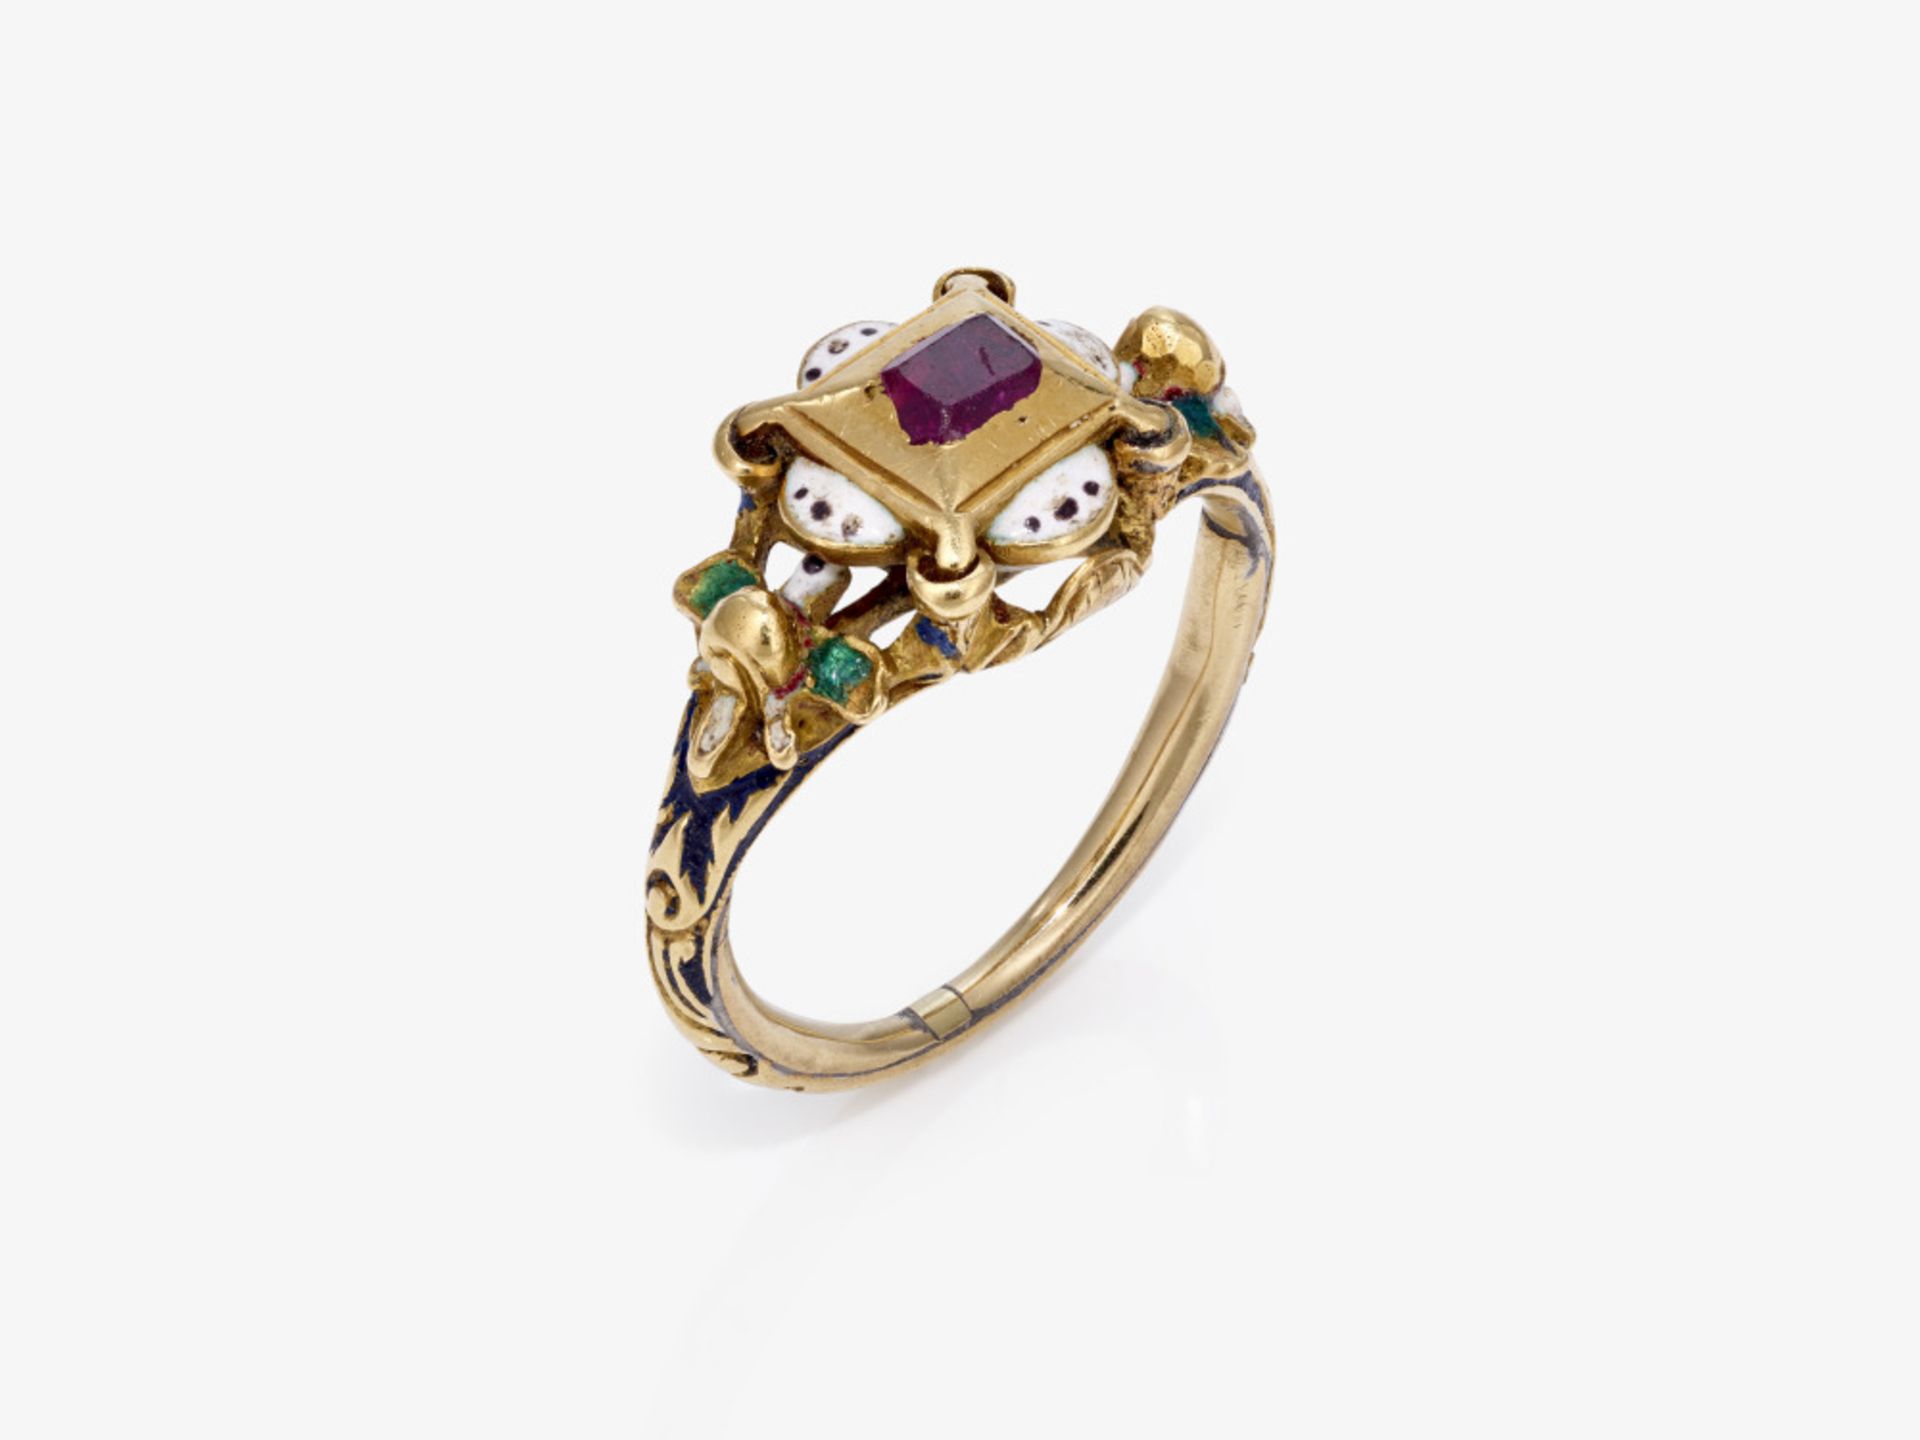 A ring with a ruby and enamel - Germany, circa 1880